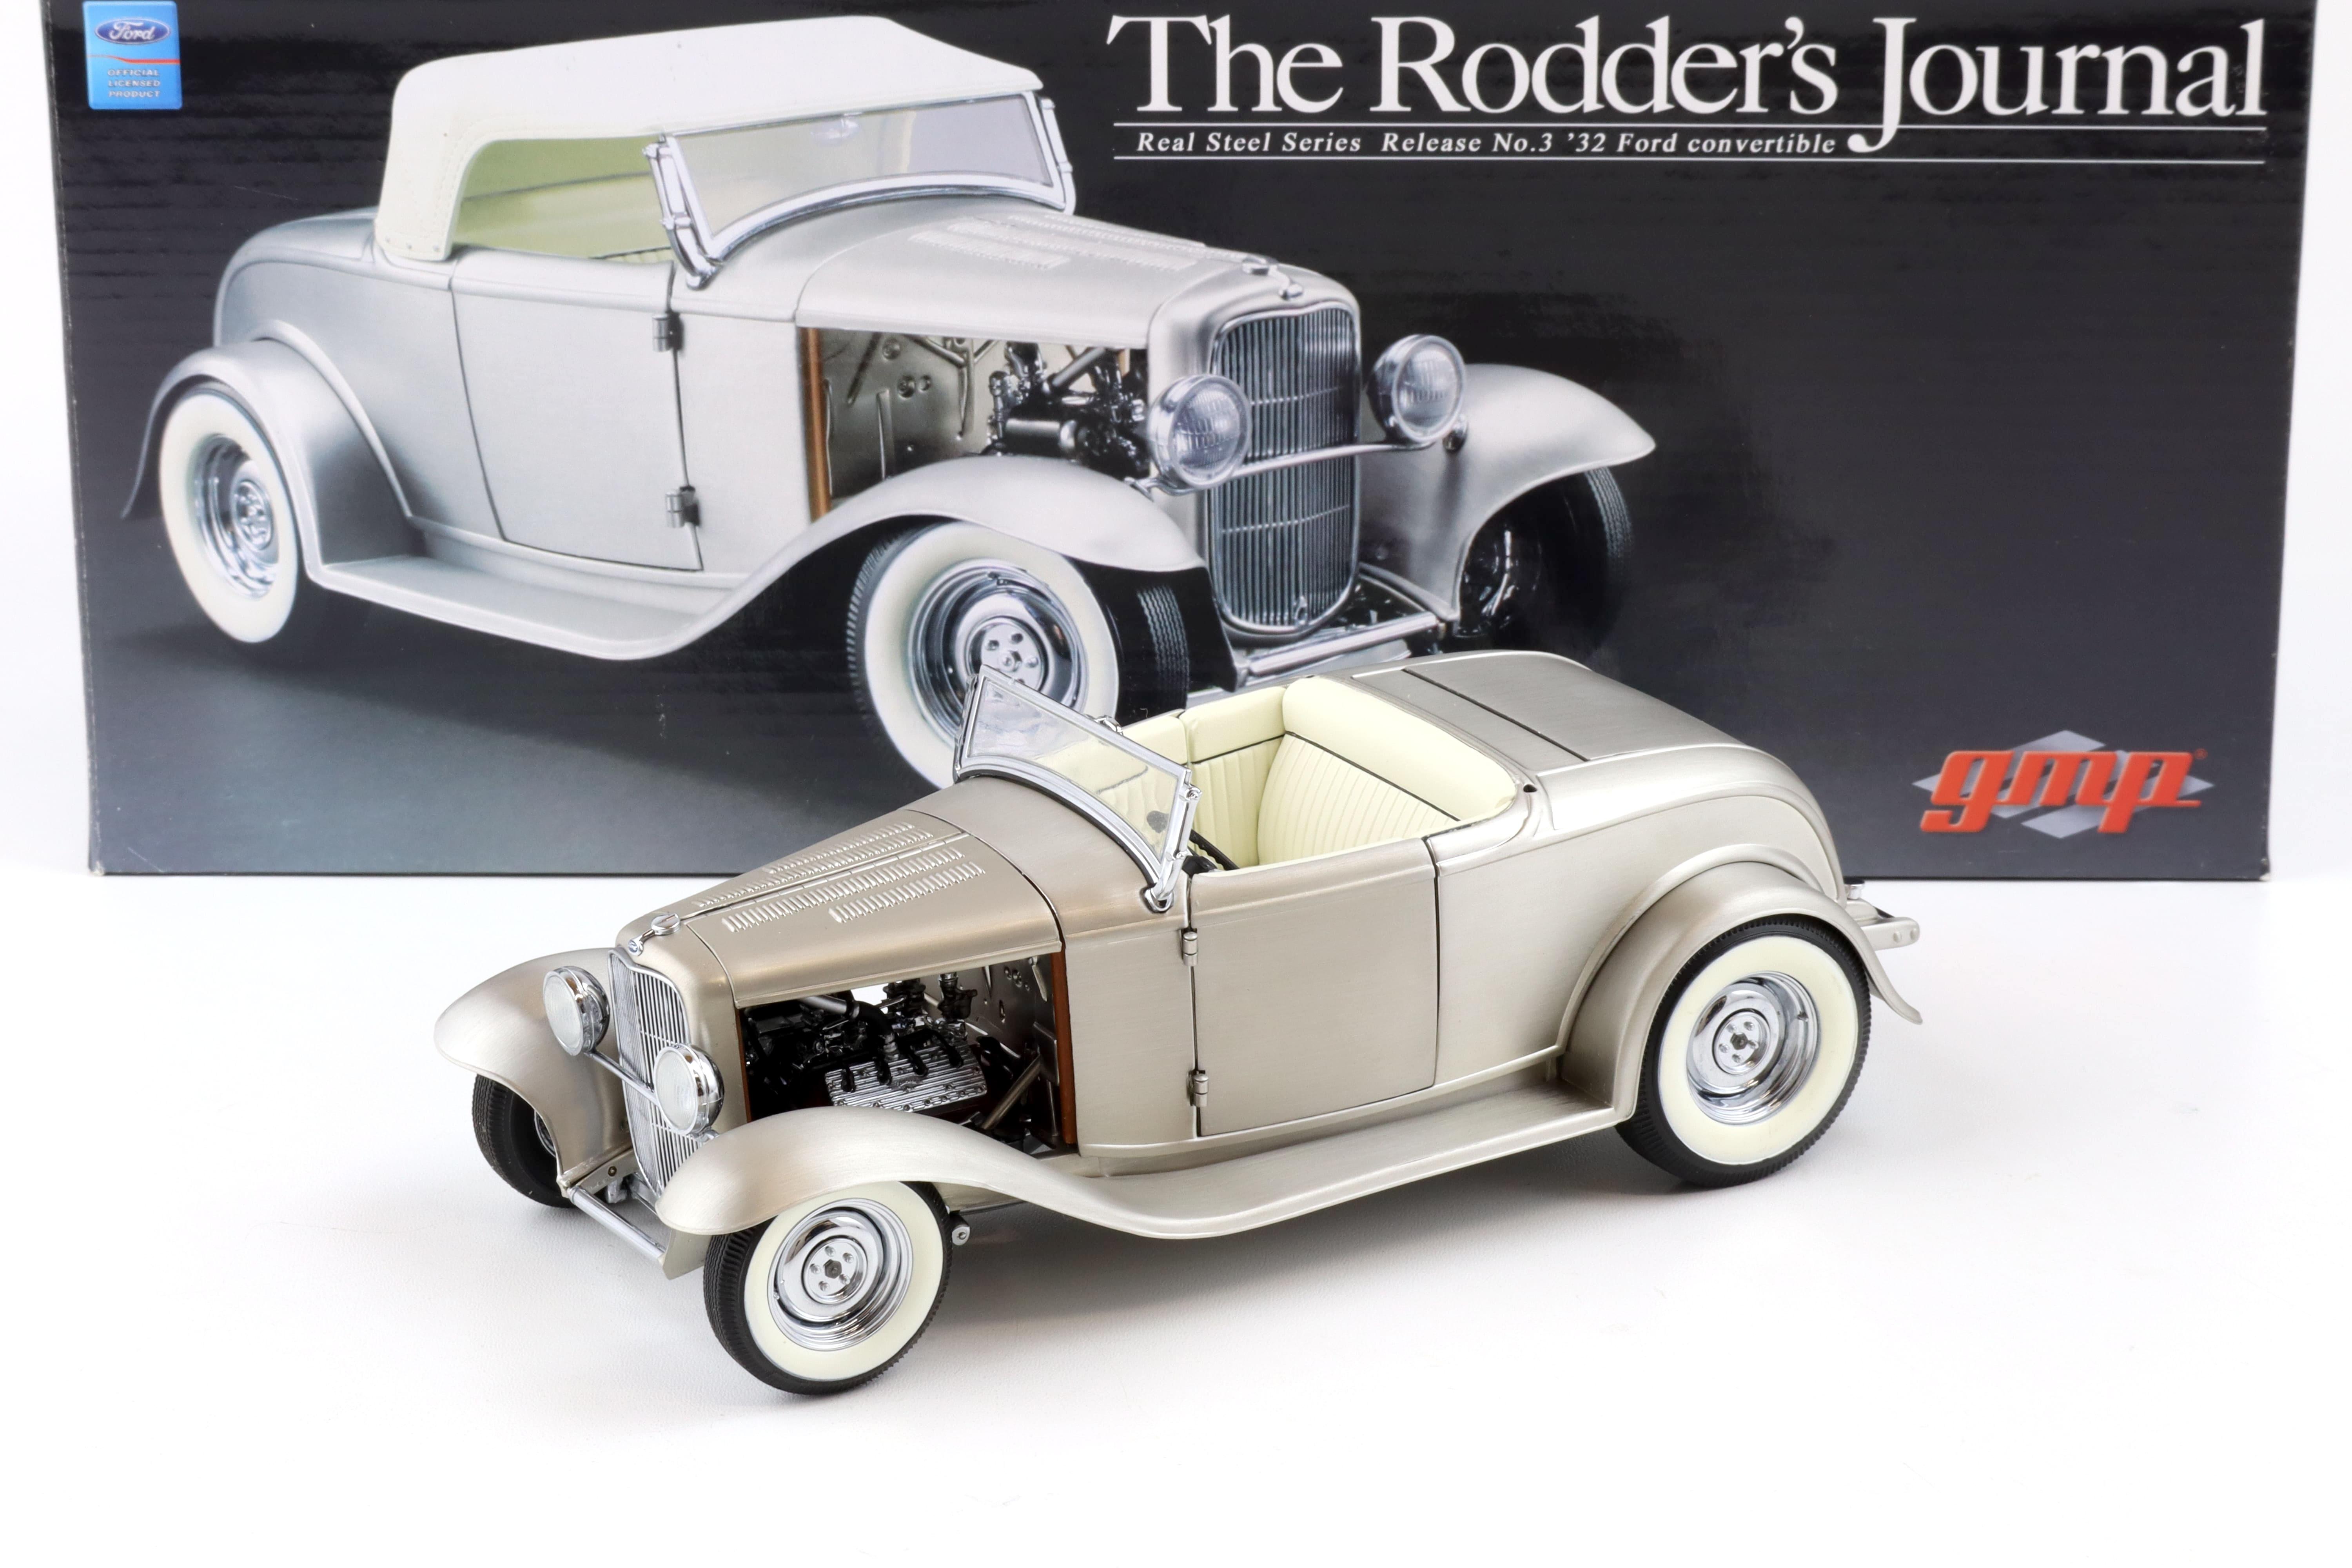 1:18 GMP 1932 Ford Convertible Hot Rod Real Steel Series No.3 Rodder's Journal